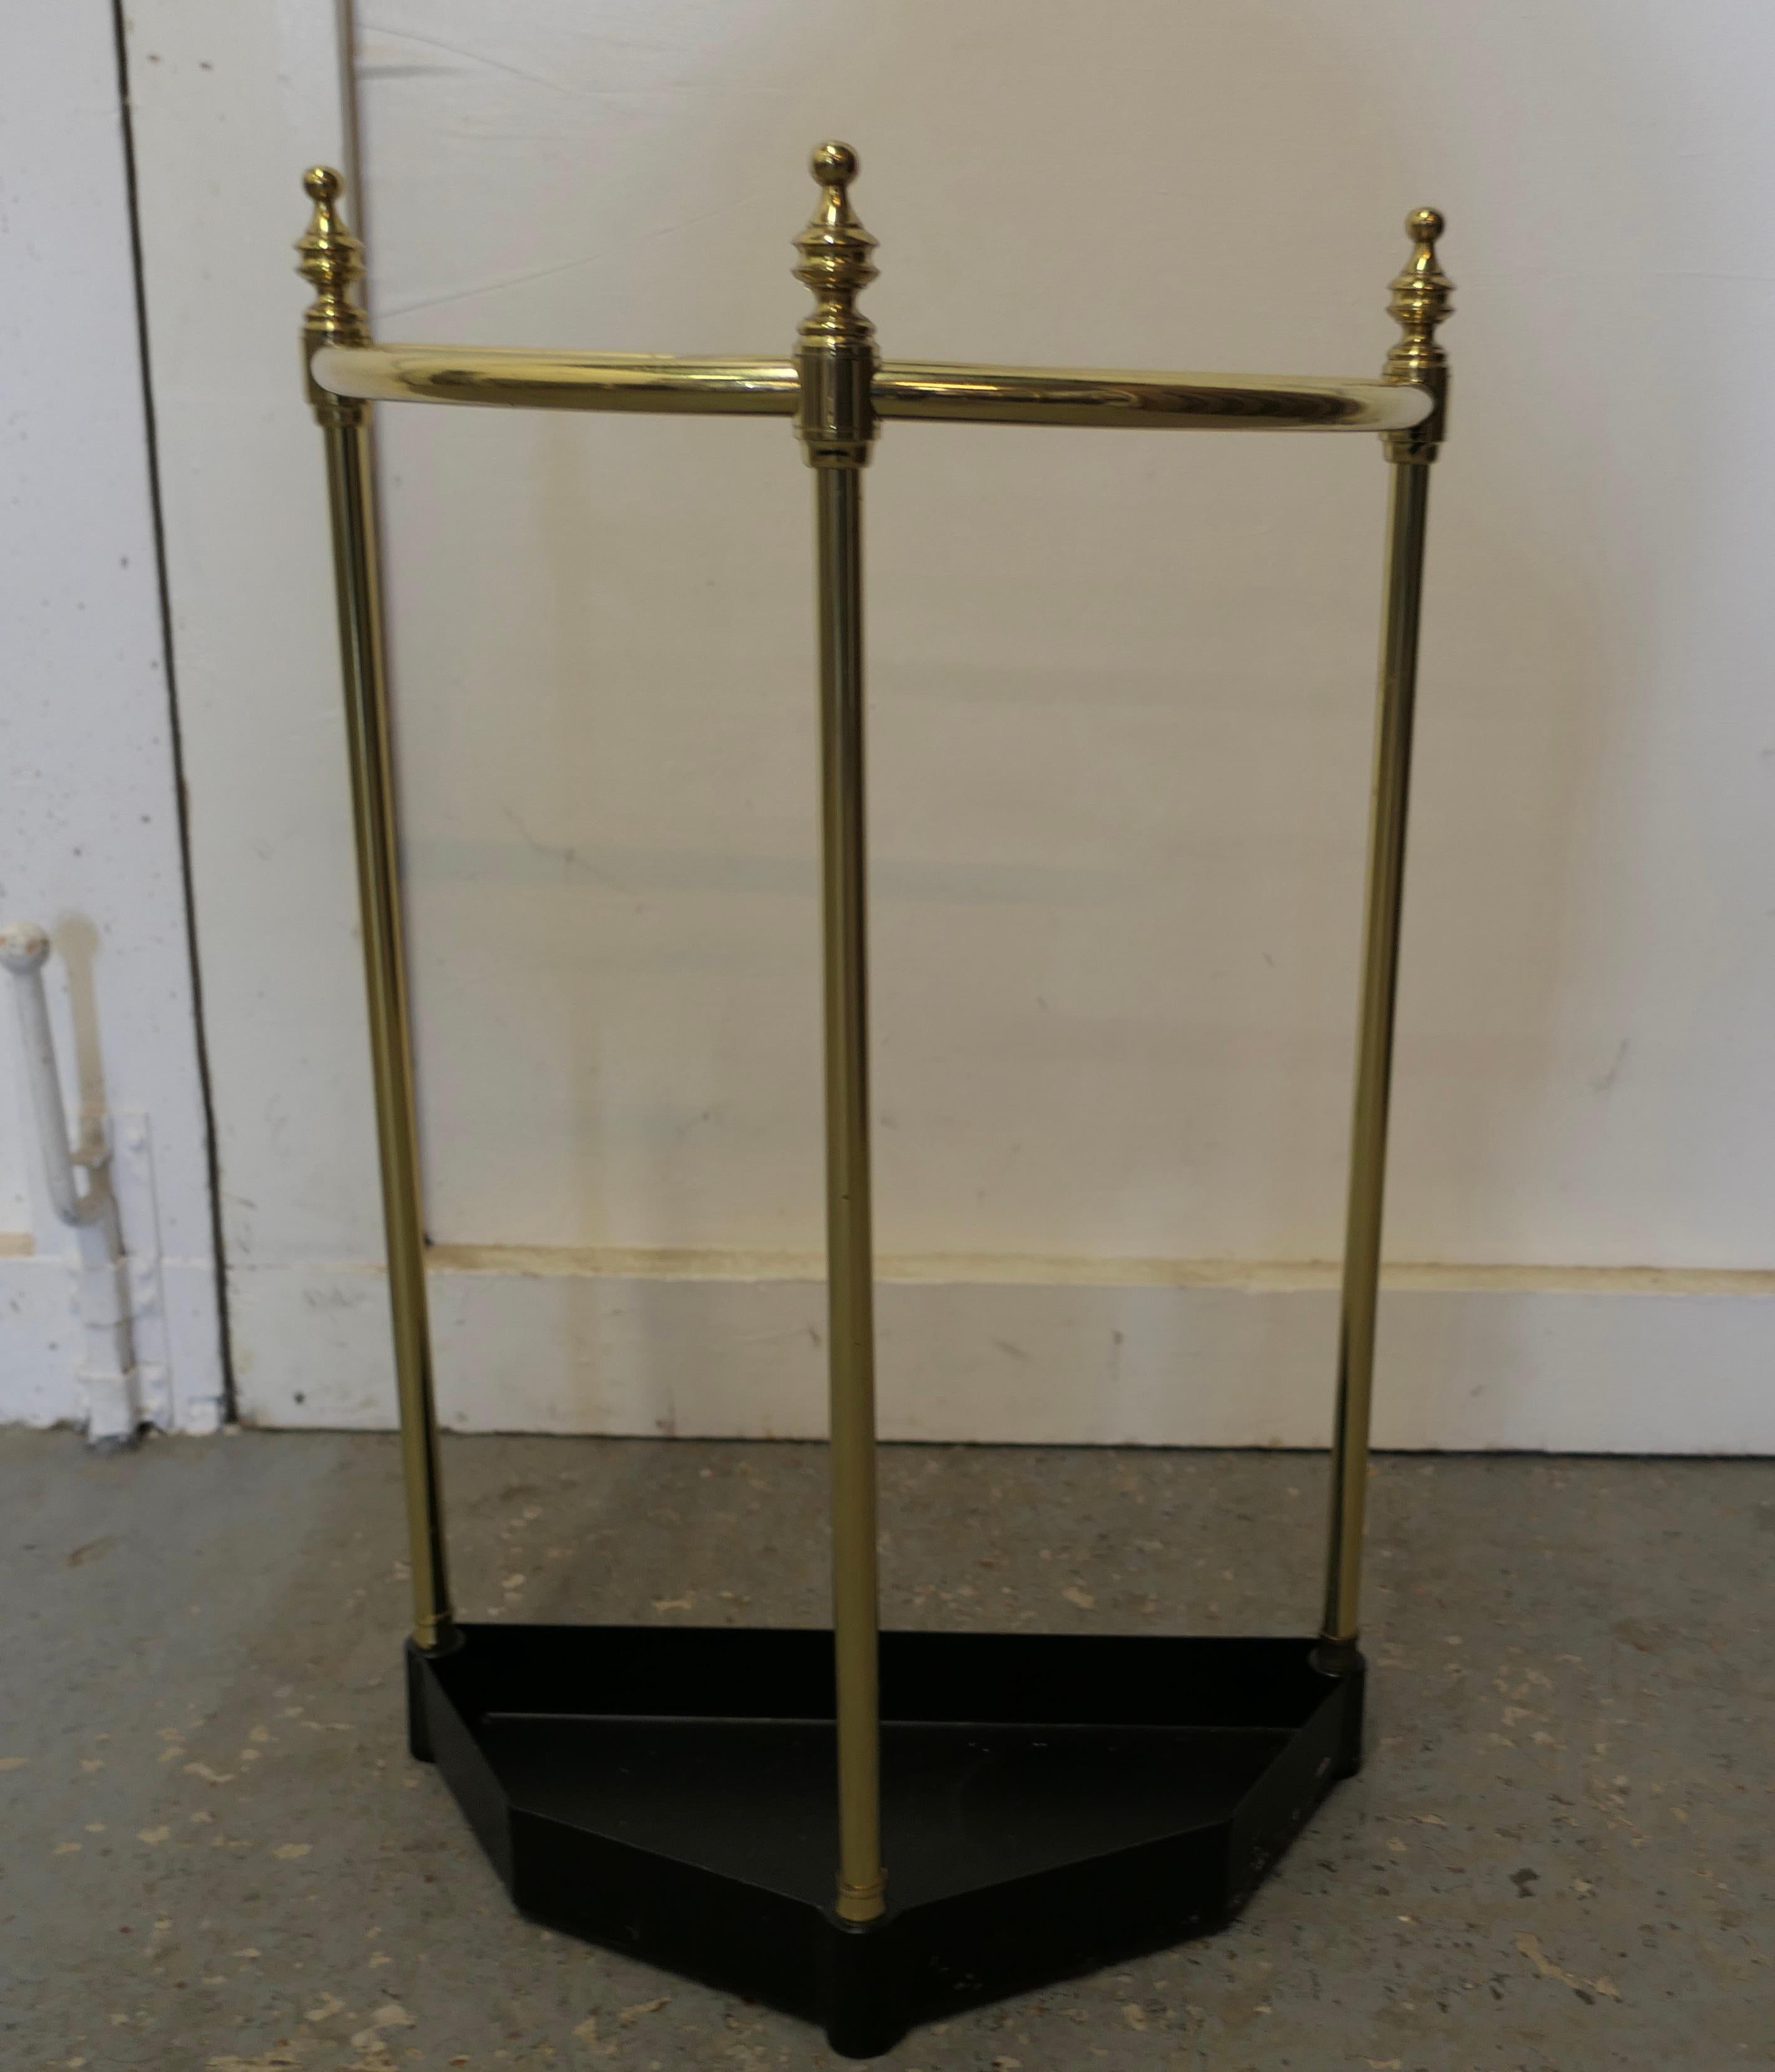 Half round brass & iron stick stand or umbrella stand

A charming piece, and it has a very unusual half moon shape, the stand is divided into 5 sections to hold either walking sticks or umbrellas and topped of with brass knobs, the heavy iron base